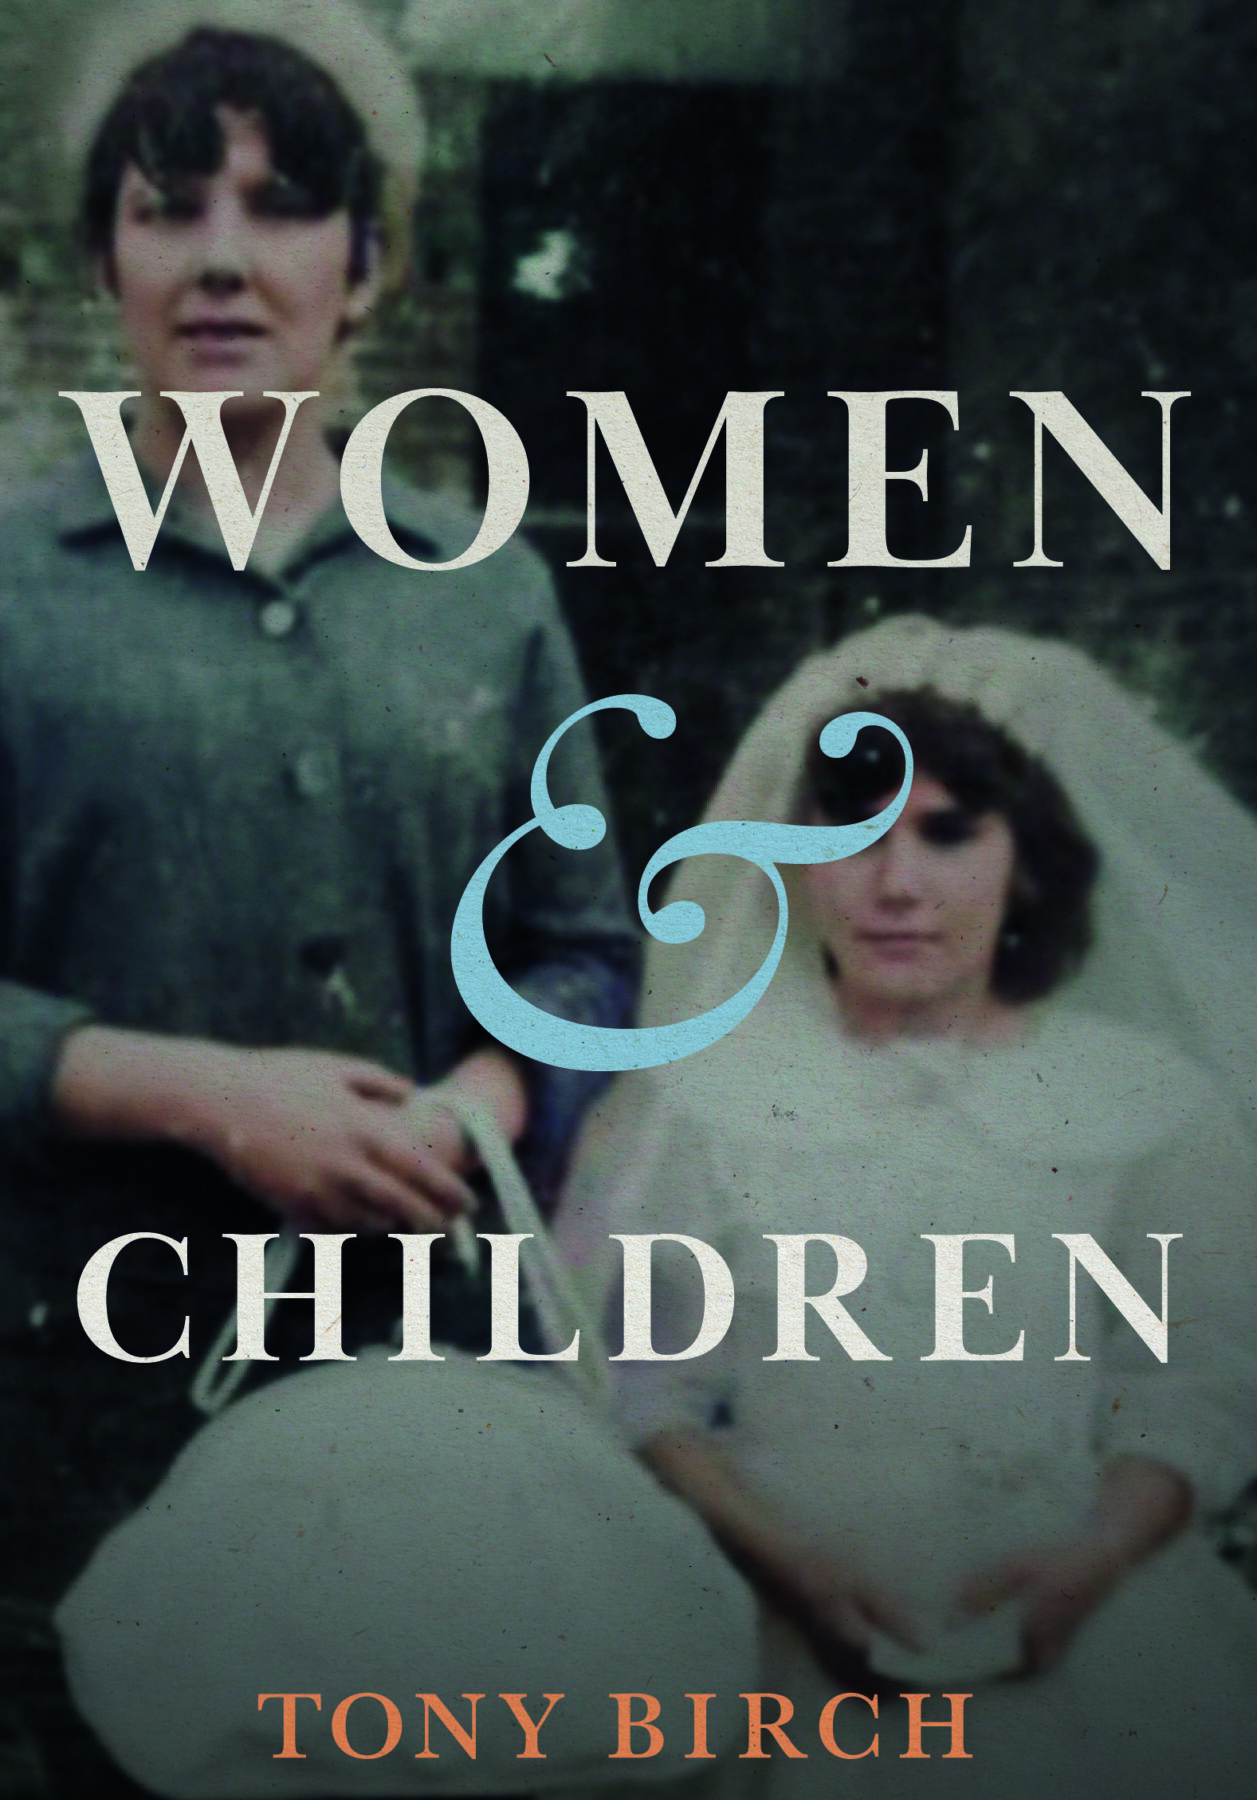 A book cover featuring a washed out photograph of two women, one in a white dress and veil, the other in a green dress and holding a bag. The title is overlaid in white large block letters